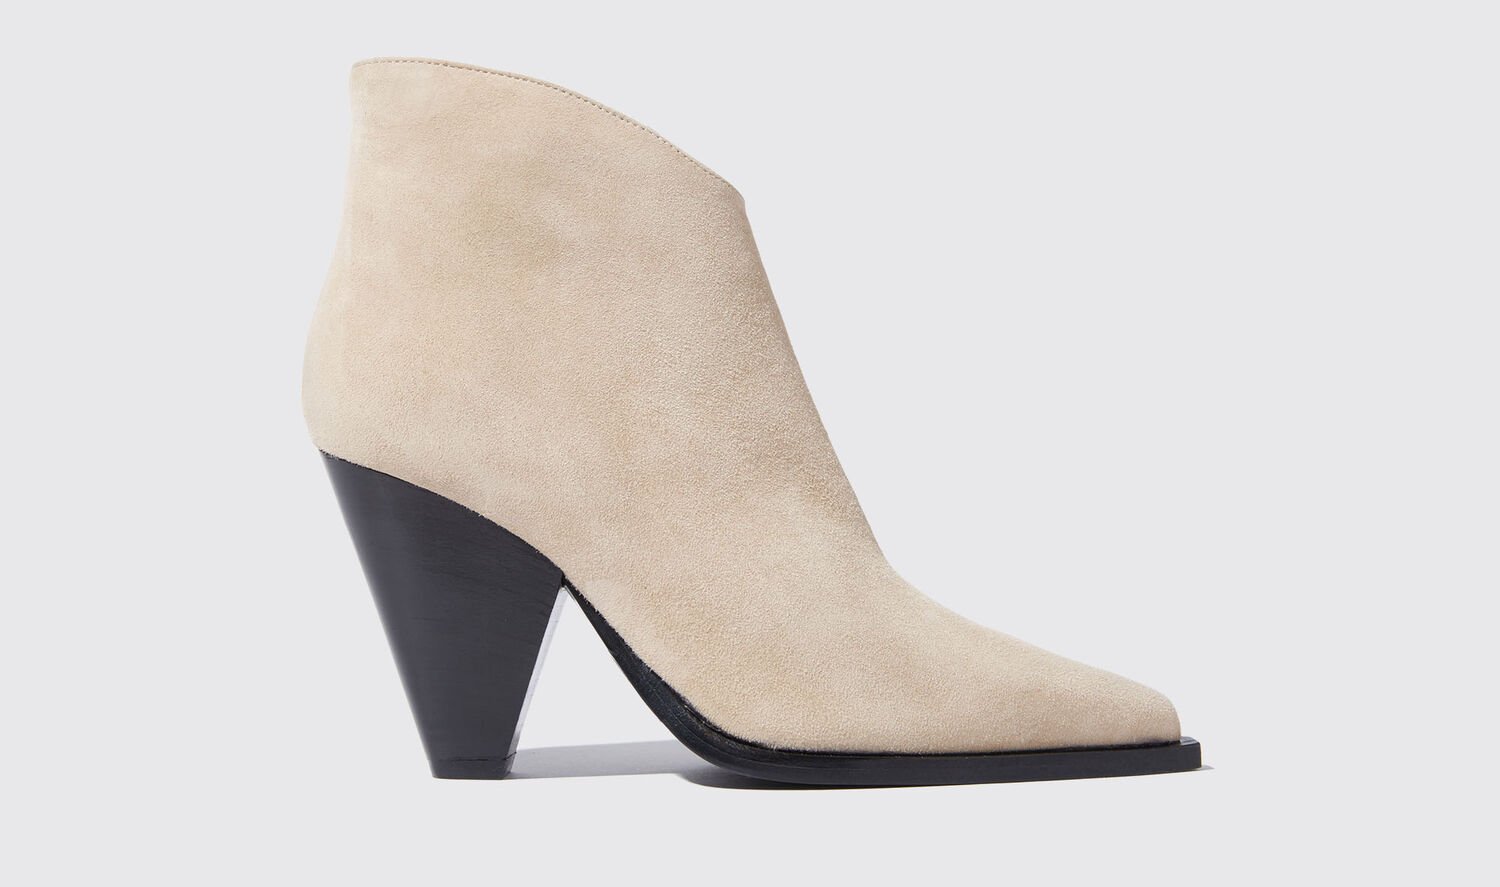 Scarosso Boots Angy Beige Suede Suede Leather In Beige - Suede